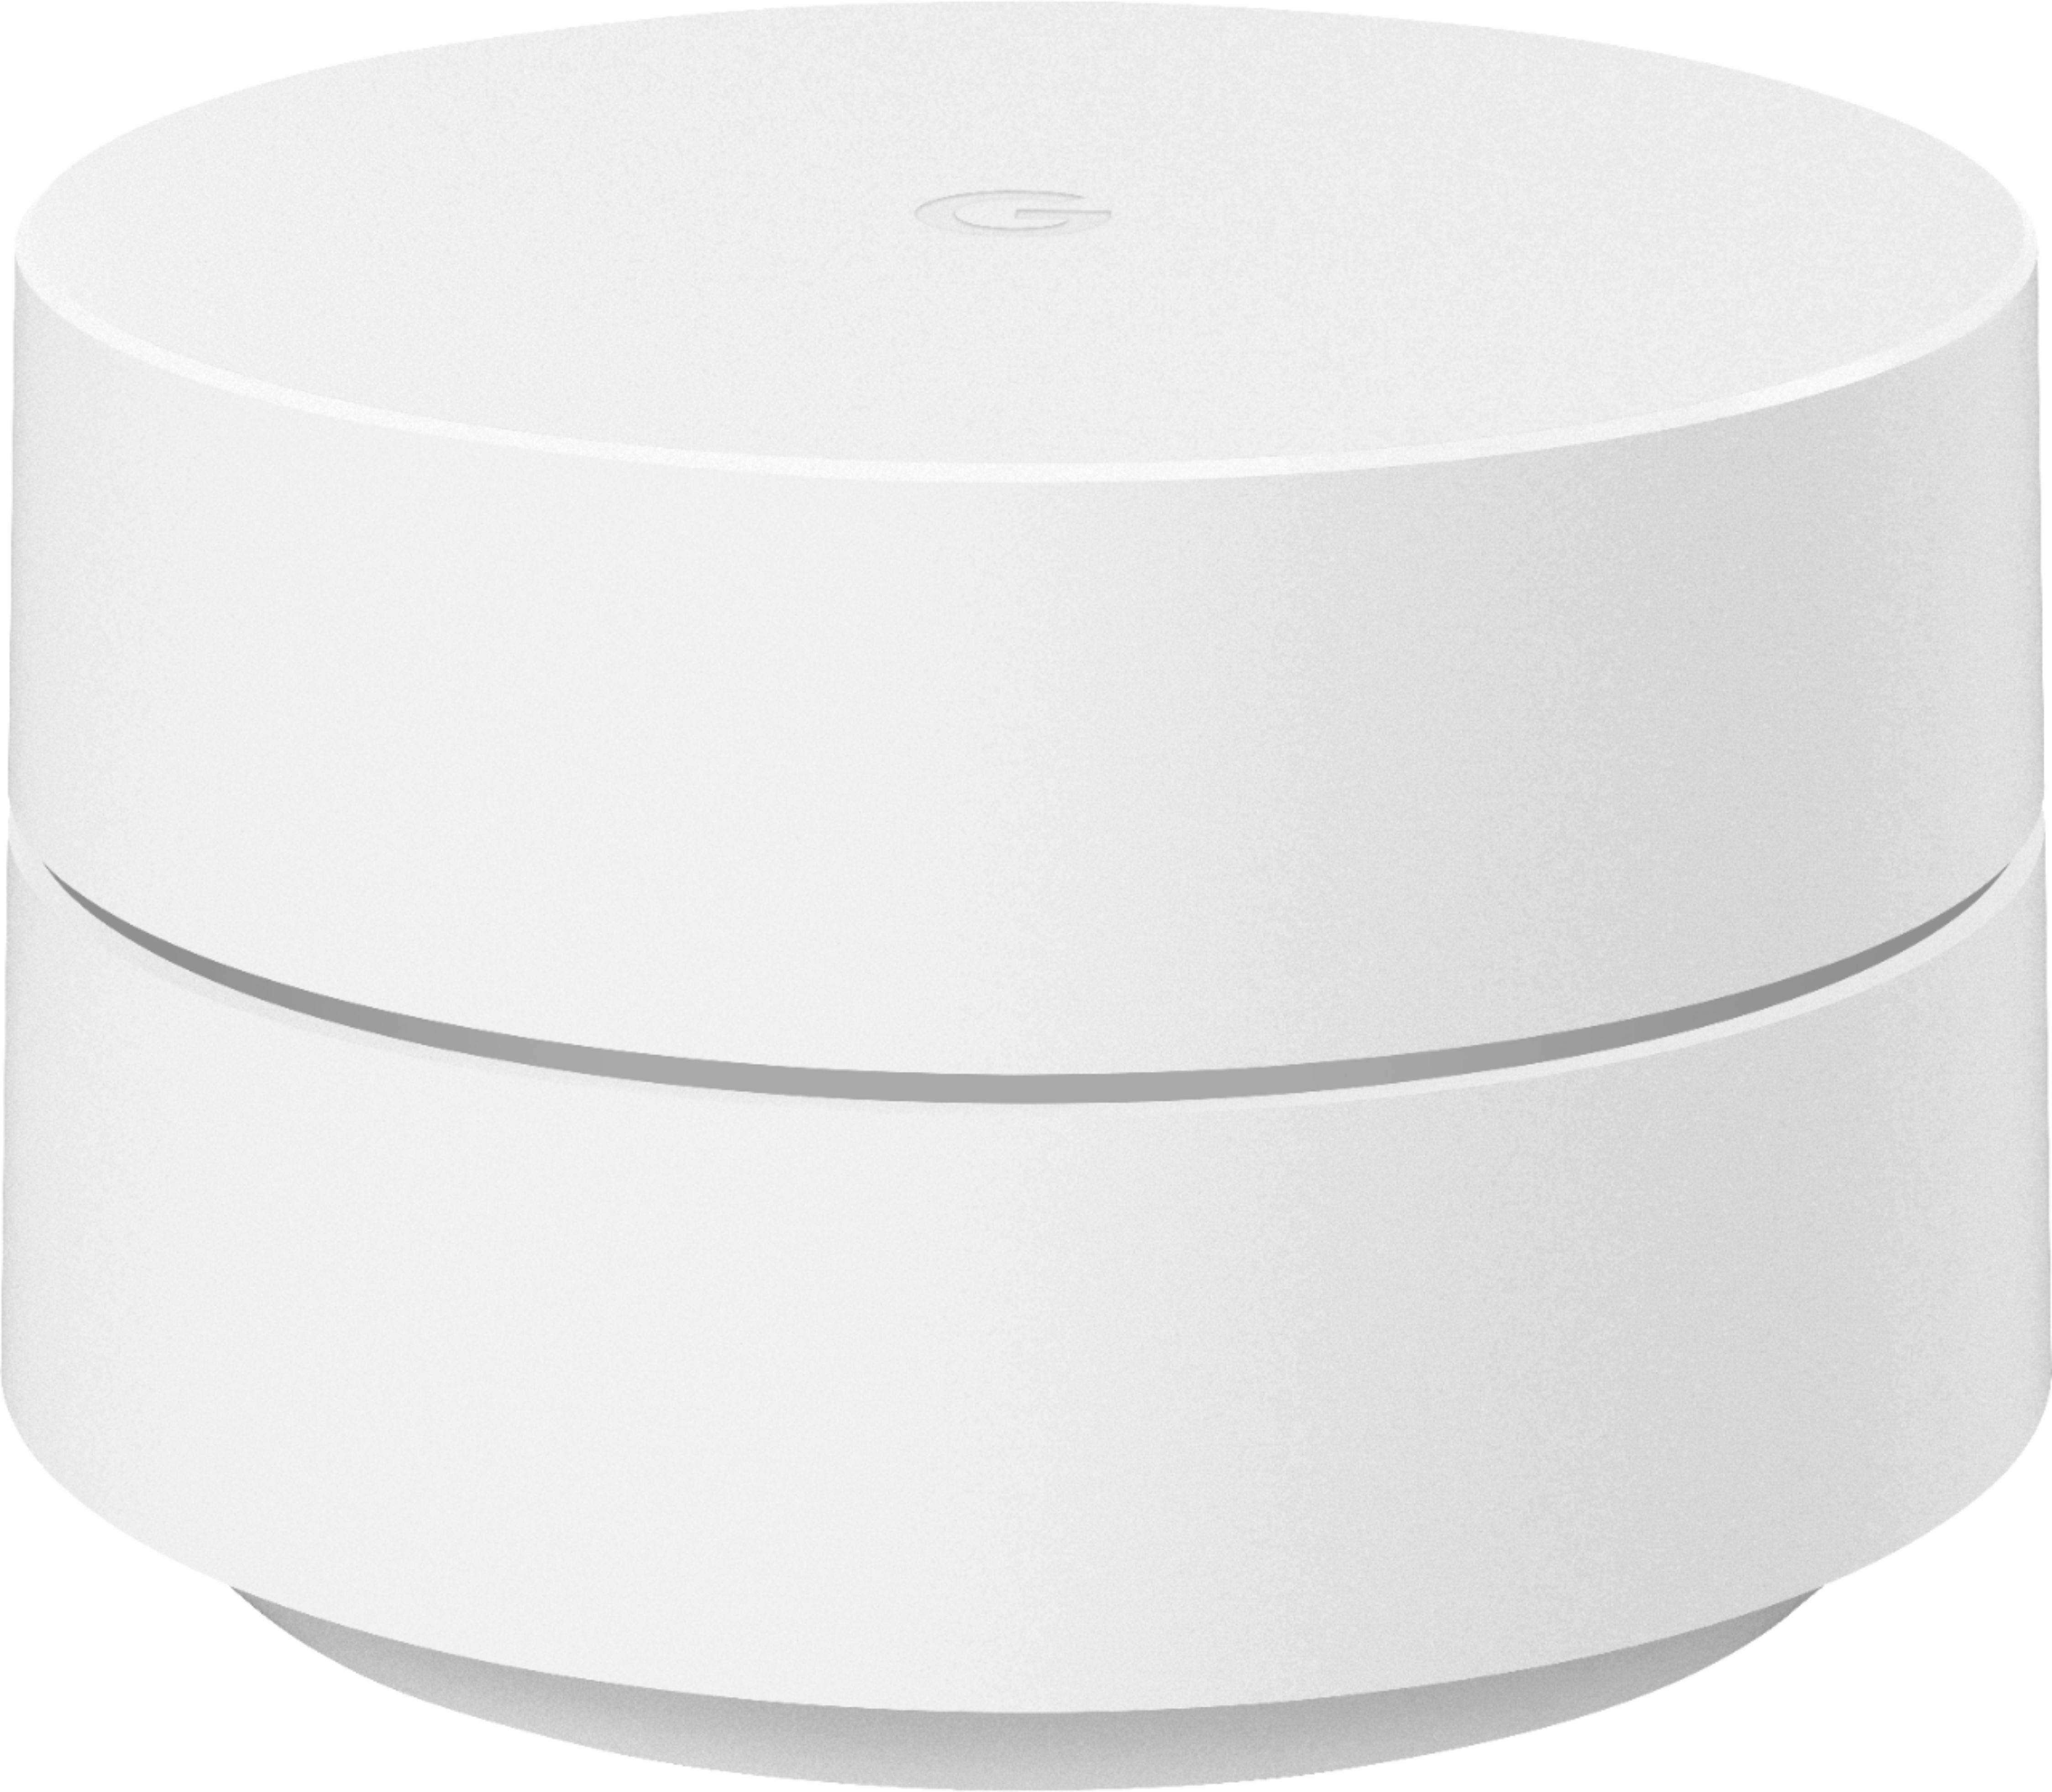 Left View: Google - Geek Squad Certified Refurbished AC1200 Dual-Band Mesh Wi-Fi Router (3-Pack) - White